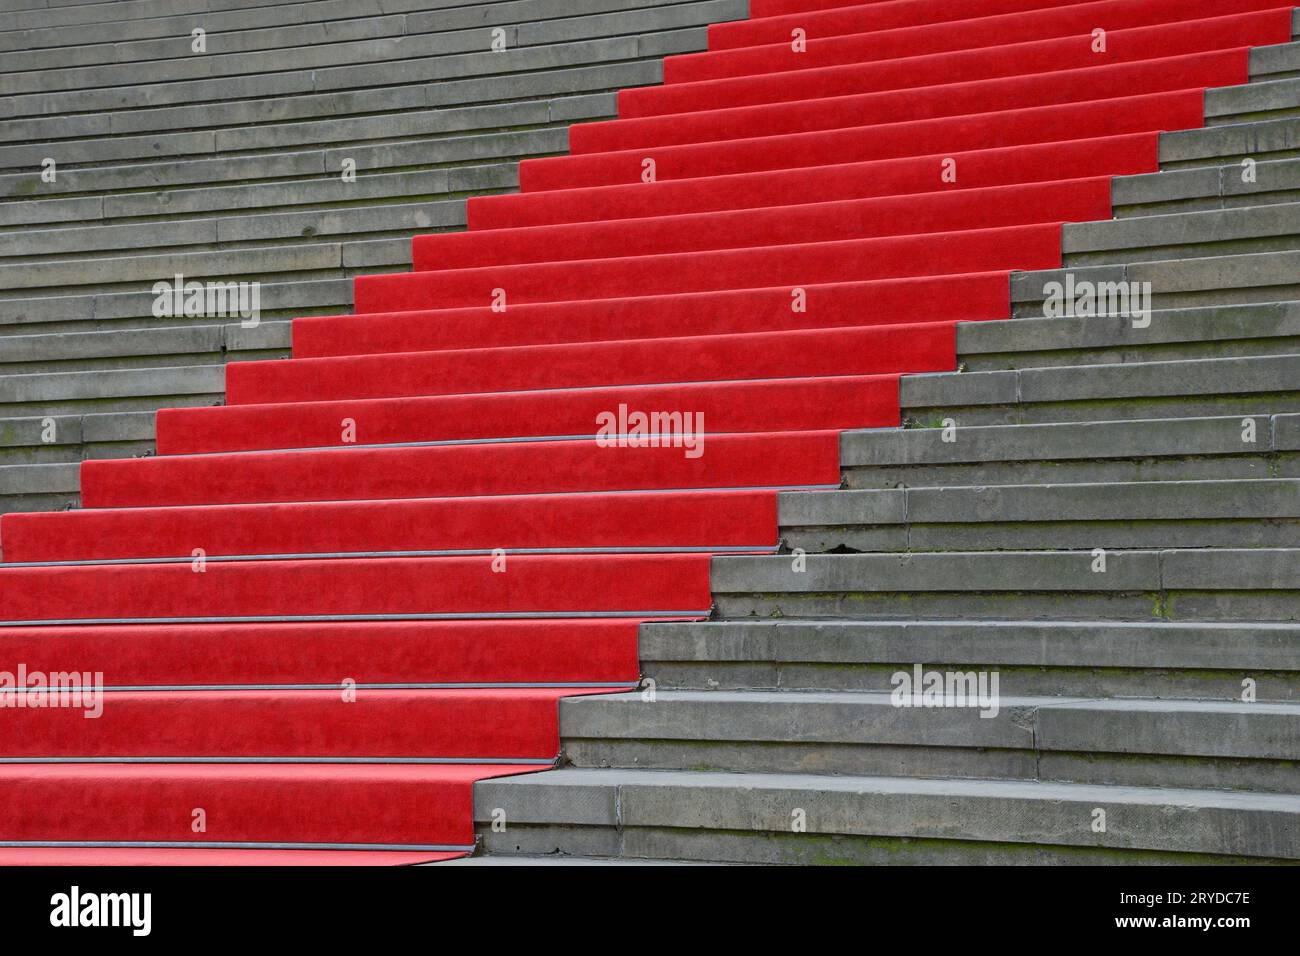 Red carpet over concrete stairs perspective Stock Photo